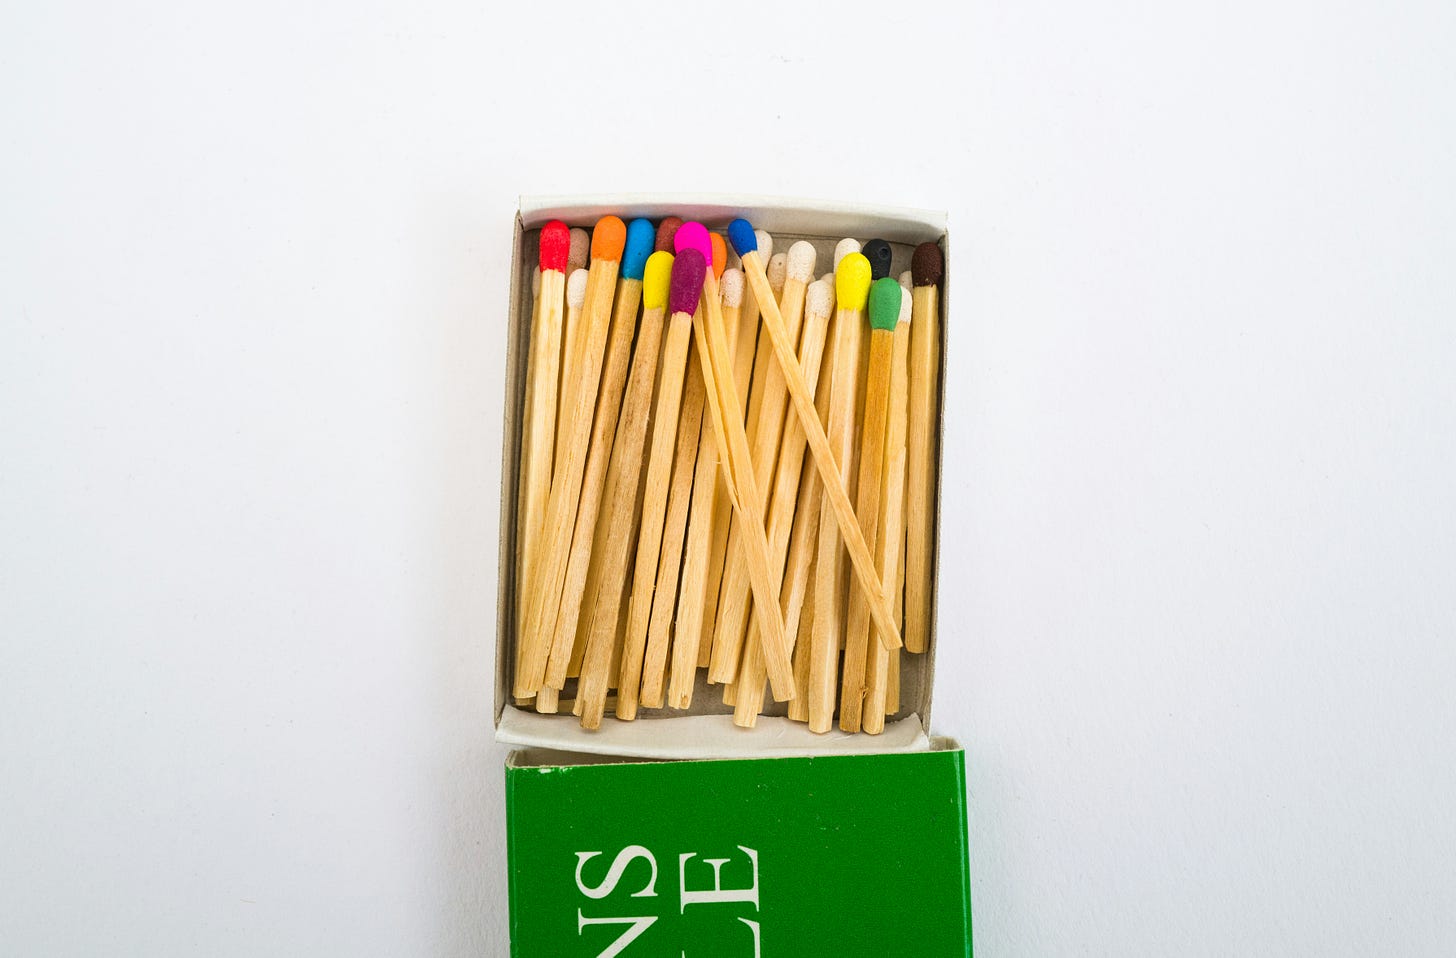 box of matches. match heads are each a different color